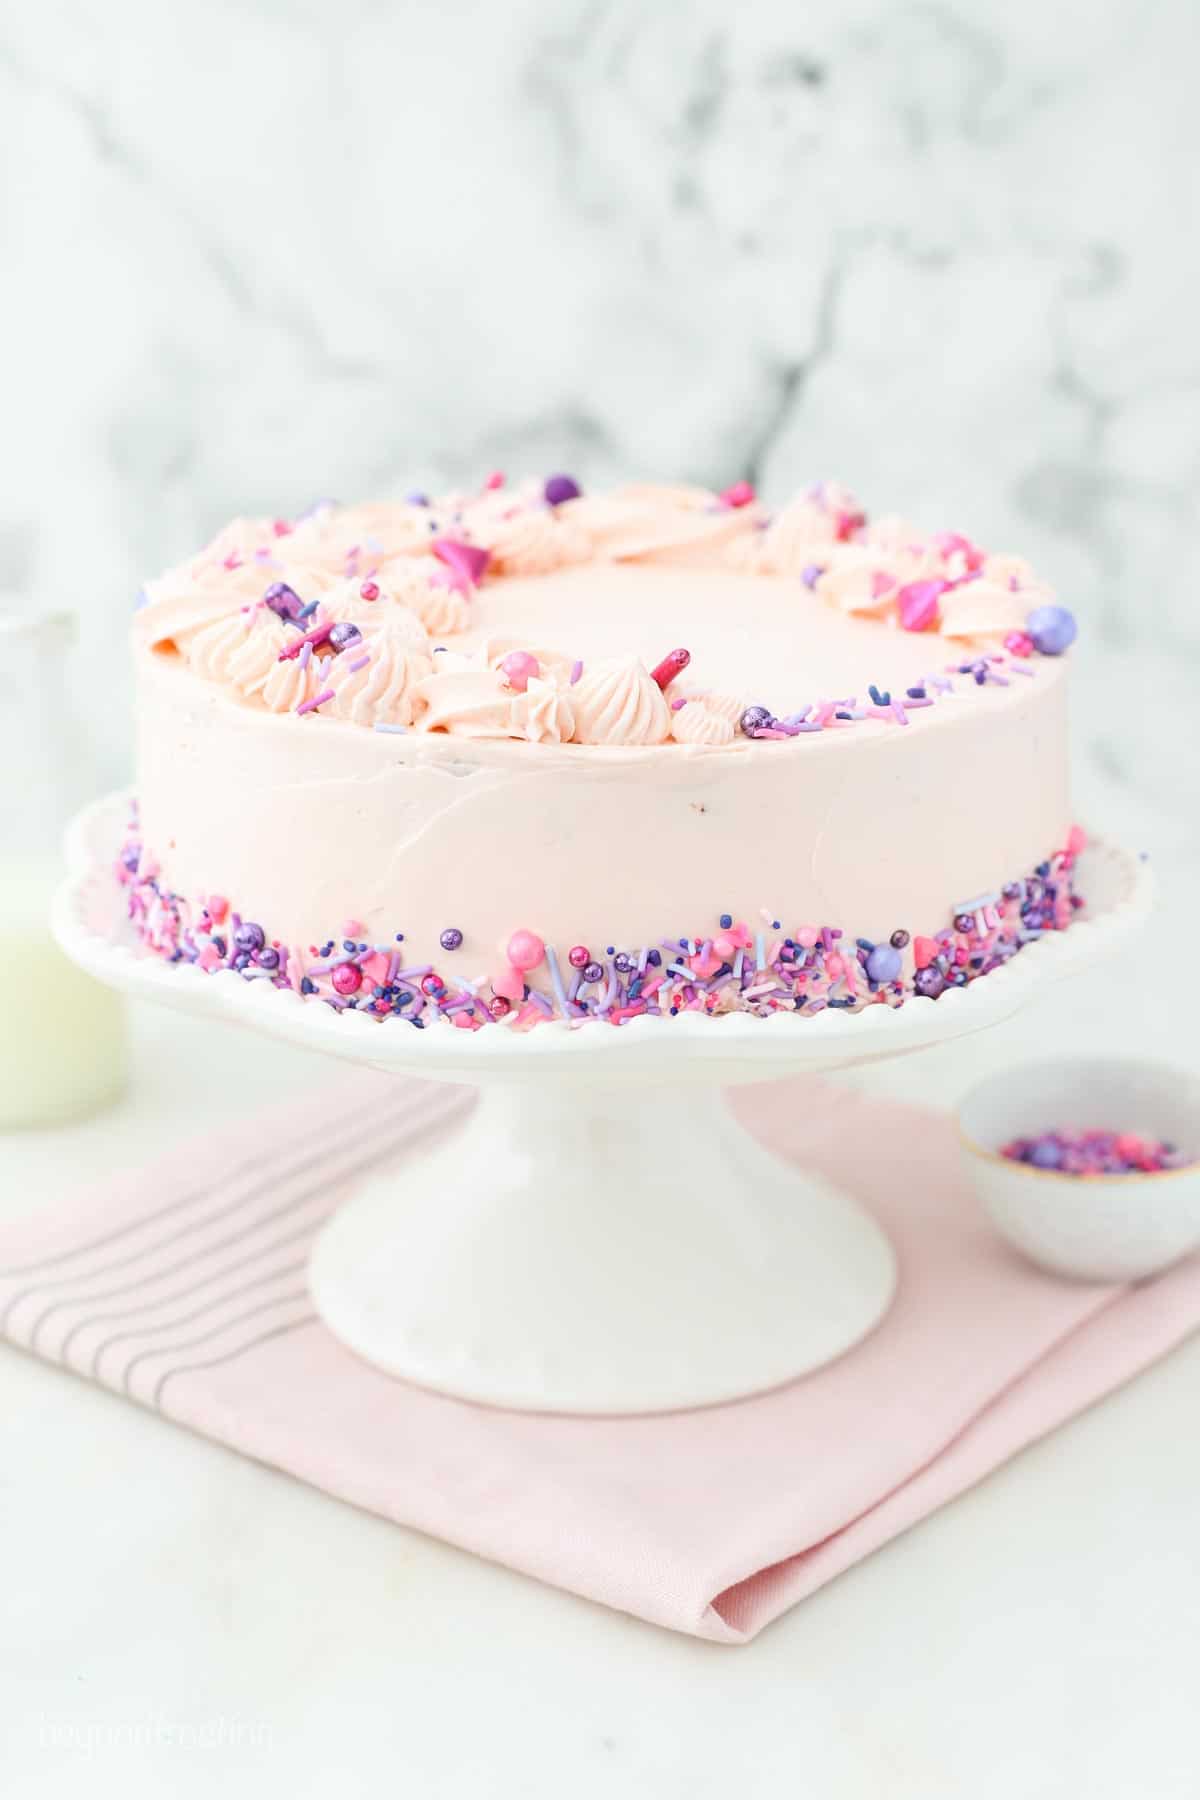 A fully decorated White Cake covered in Swiss Meringue Buttercream and sprinkles on a cake platter.